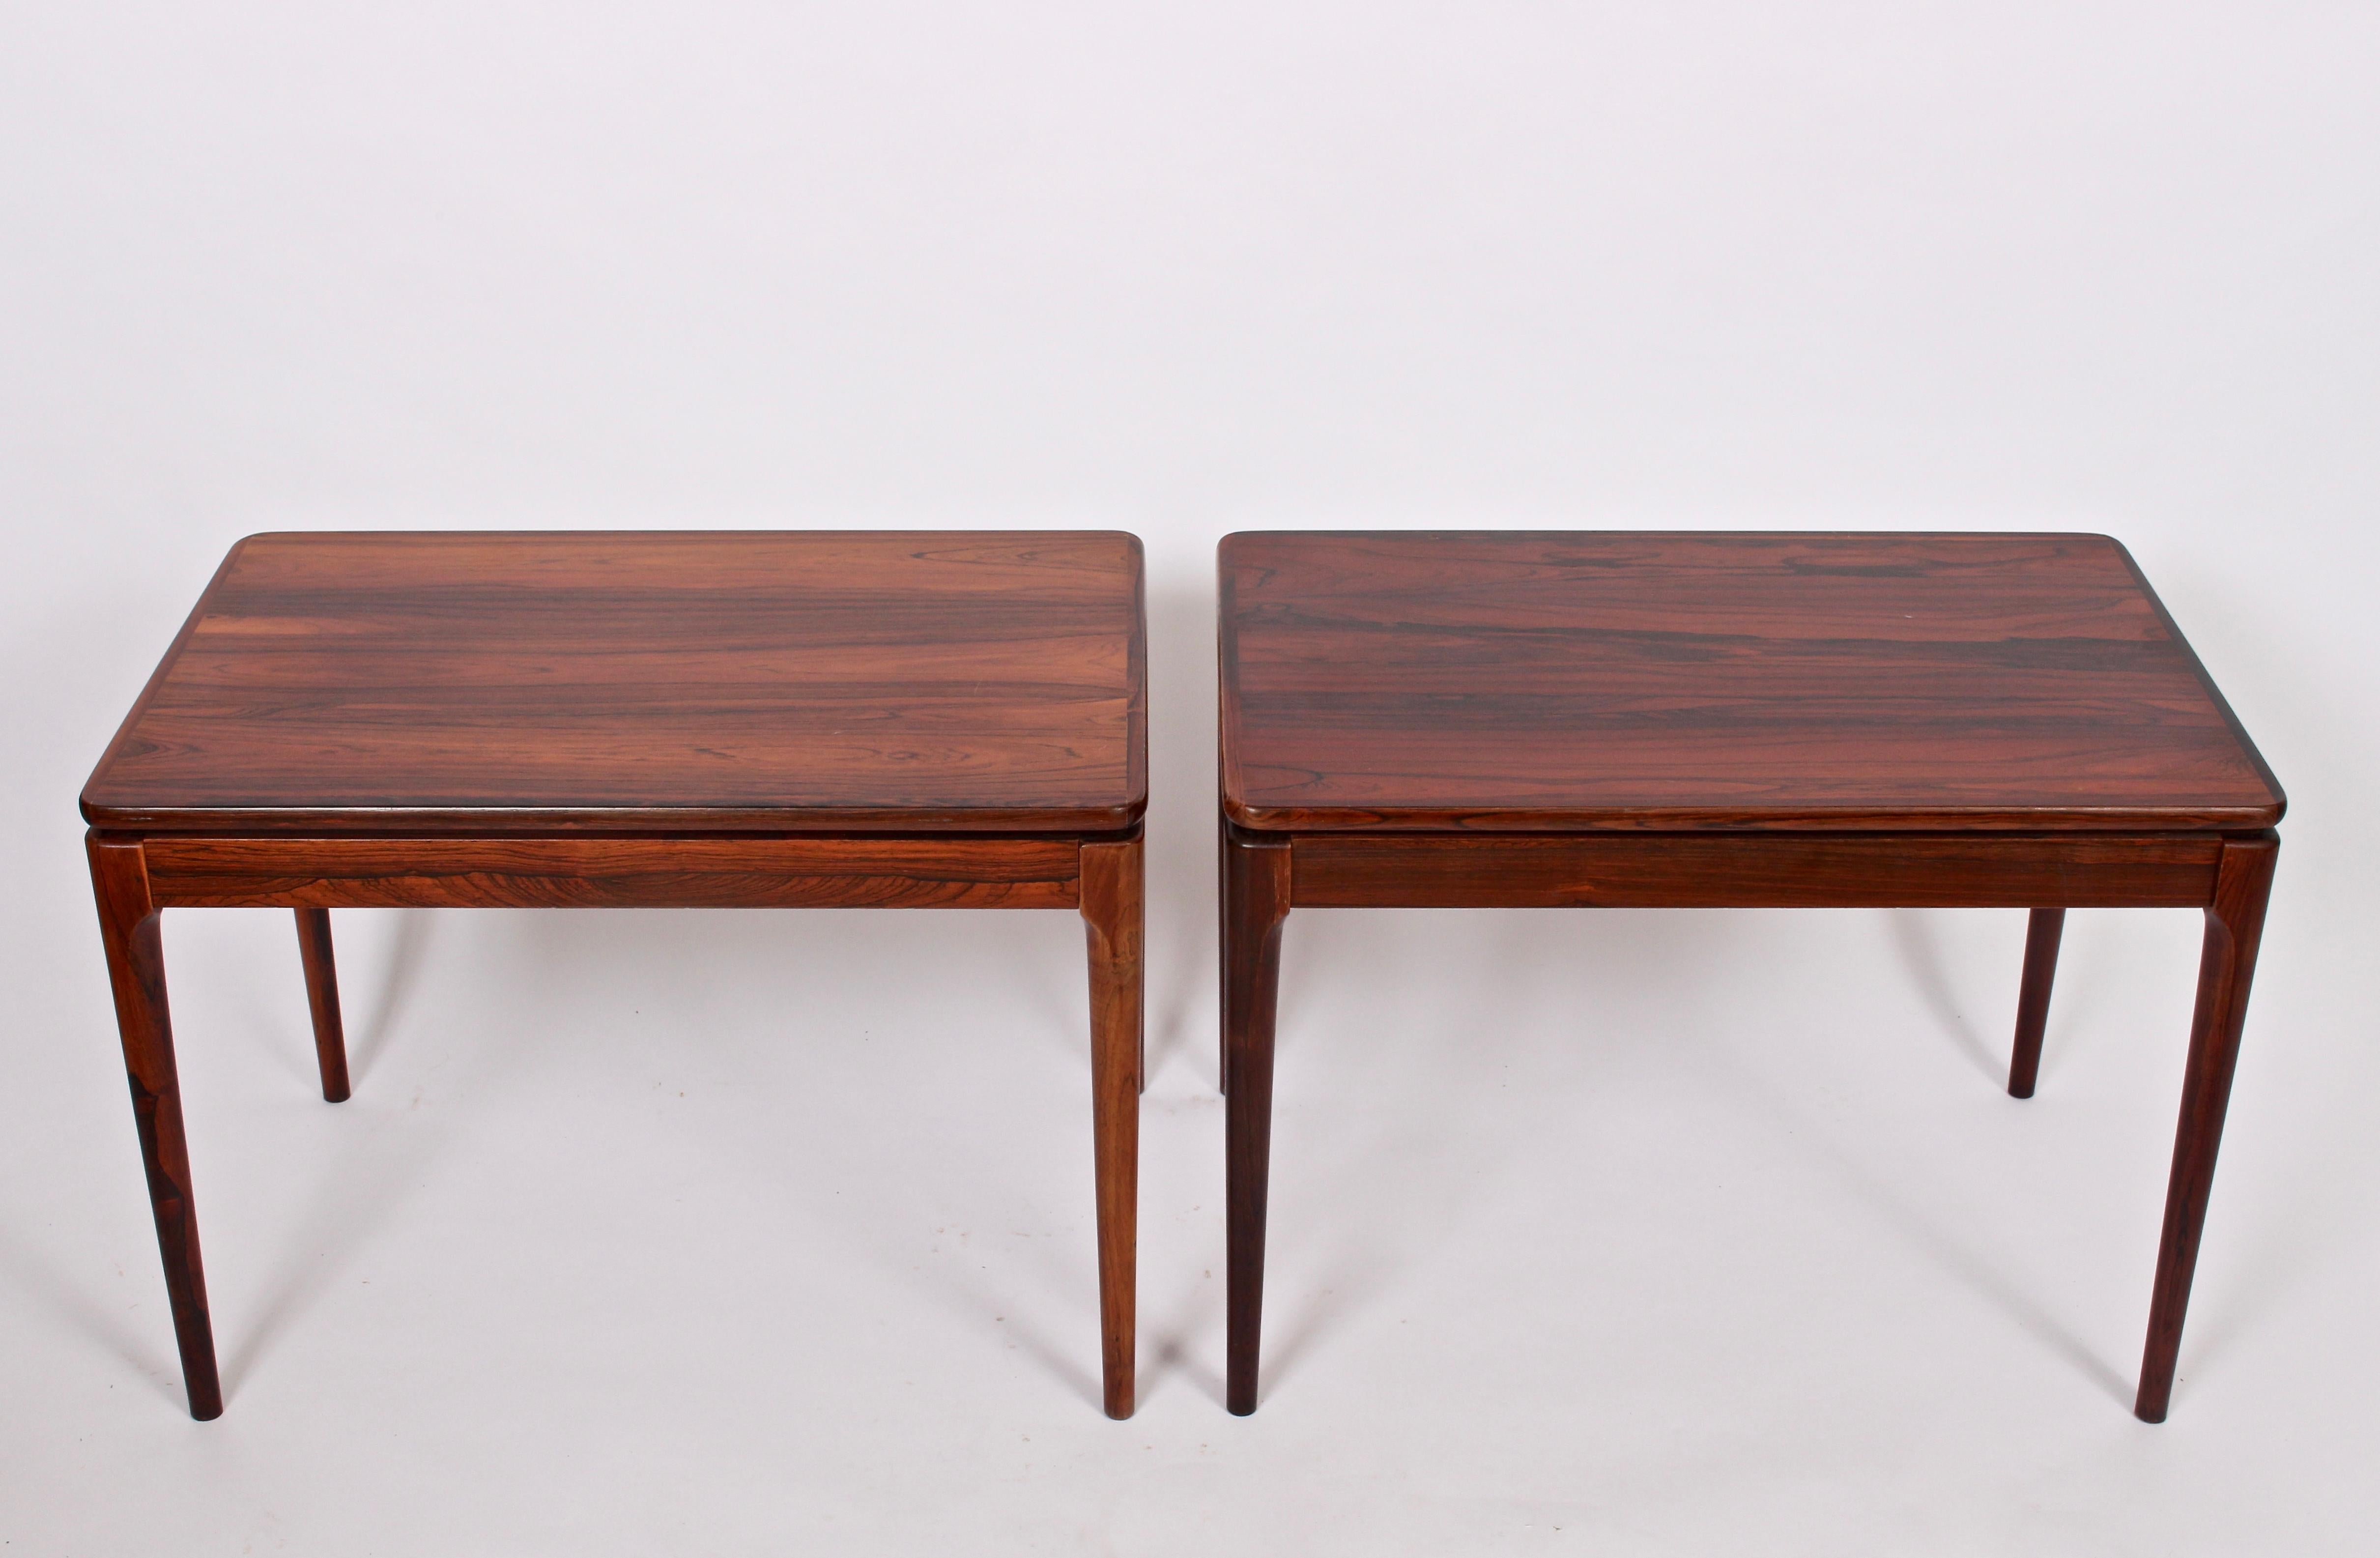 Pair of Norwegian Modern Ganddal Møbelfabrik solid Rosewood side tables, bedside tables. Featuring a rectangular form in beautifully grained solid rosewood with slotted vertice detail between turned solid rosewood legs and surface. Look great placed